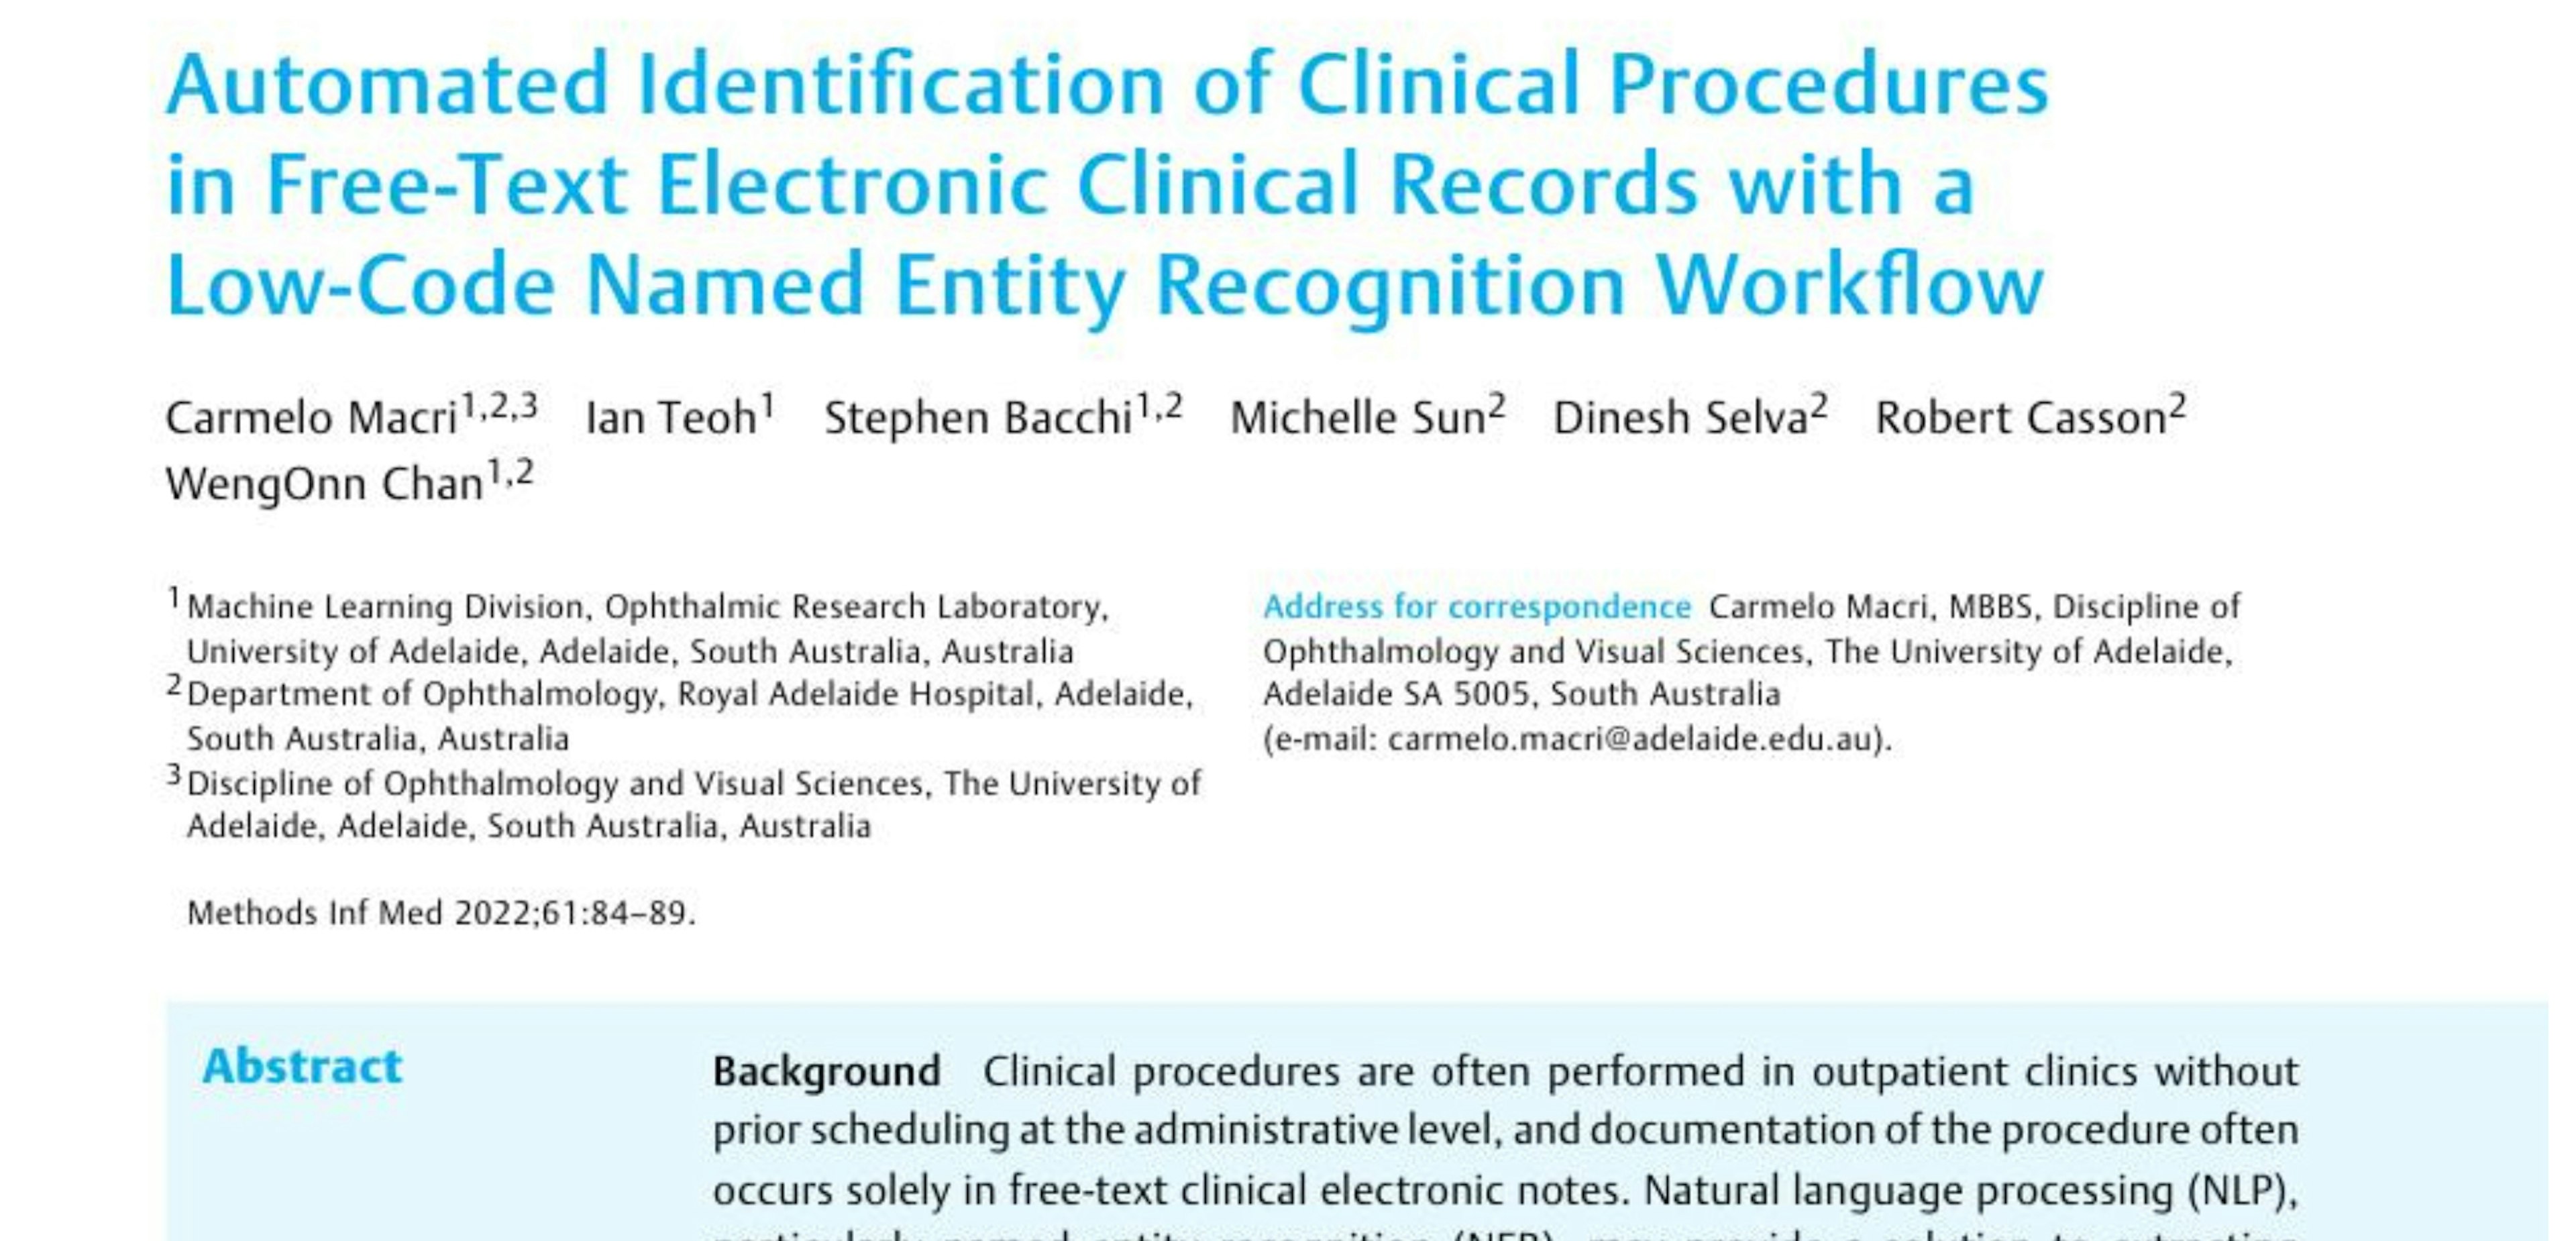 Automated Identification of Clinical Procedures in Free-Text Electronic Clinical Records with a Low-Code Named Entity Recognition Workflow